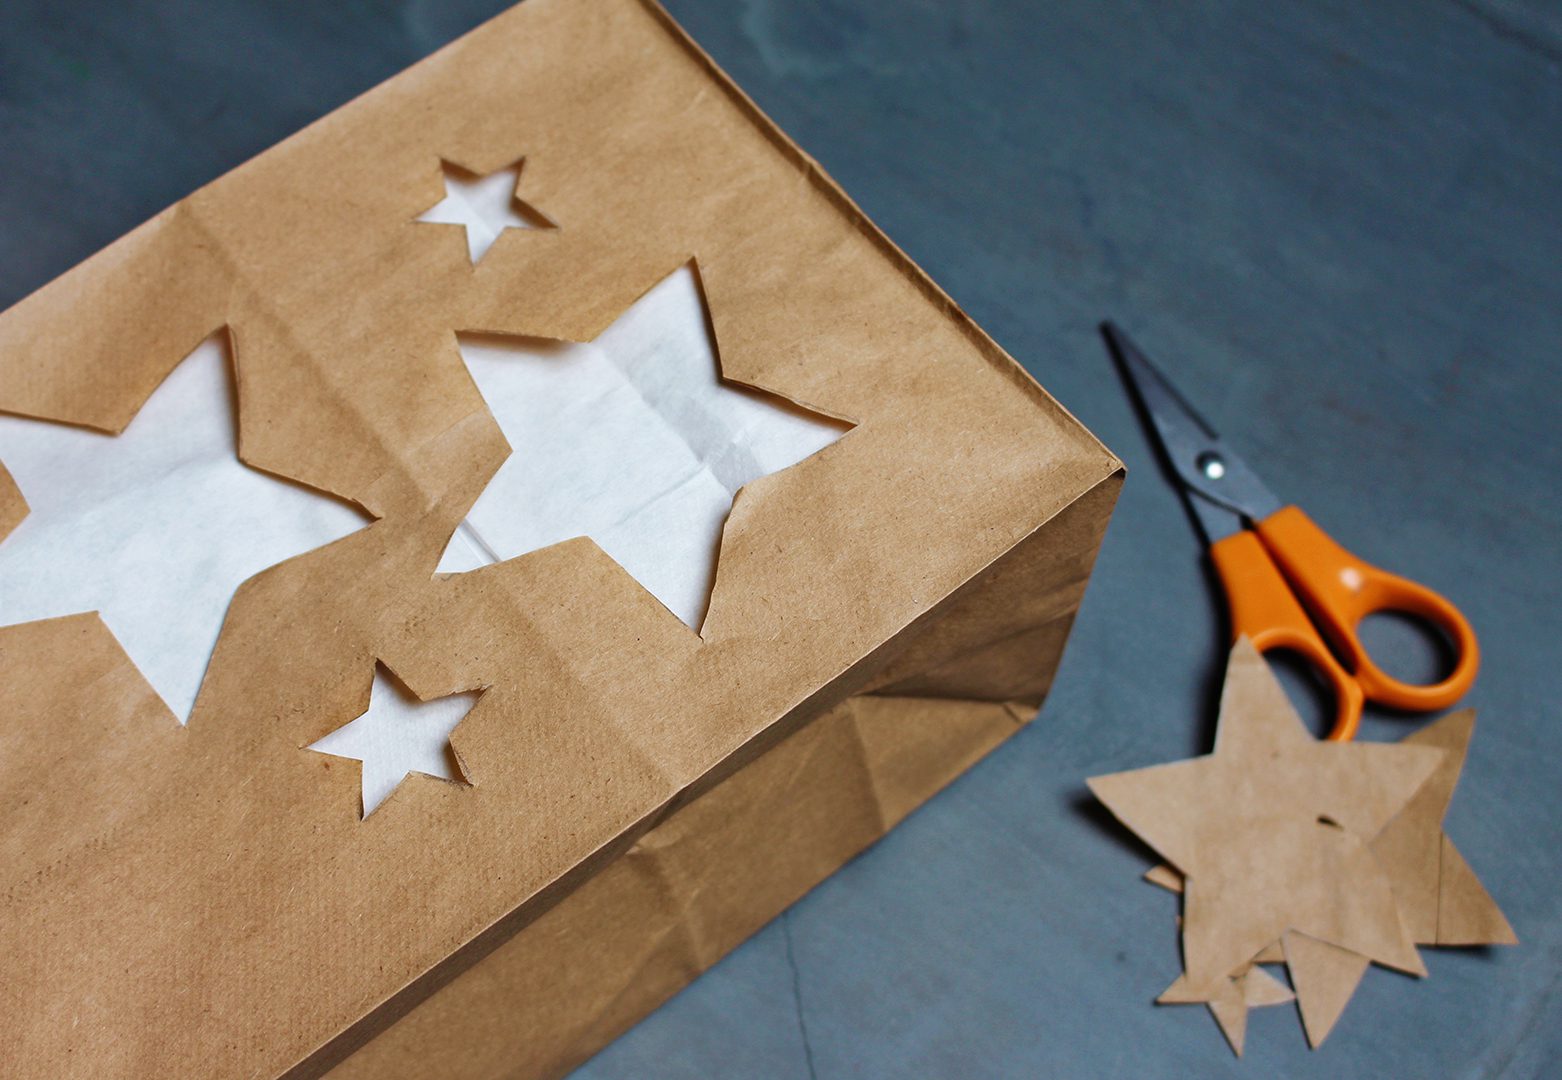 Stars cut out of a brown paper bag lined with a white paper lunch bag, near a pair of scissors. 